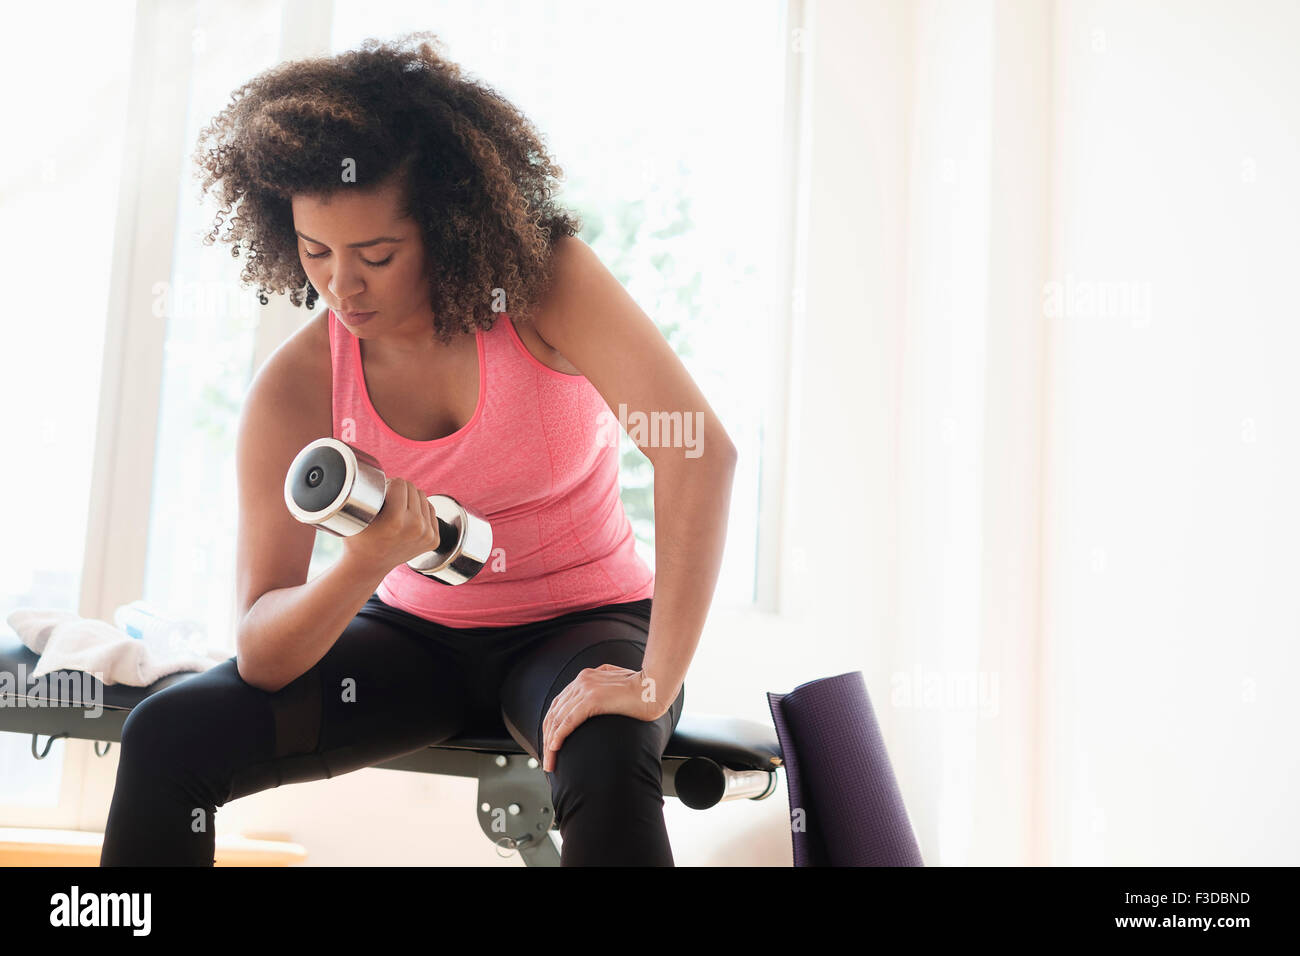 Young woman training with dumbbells Stock Photo